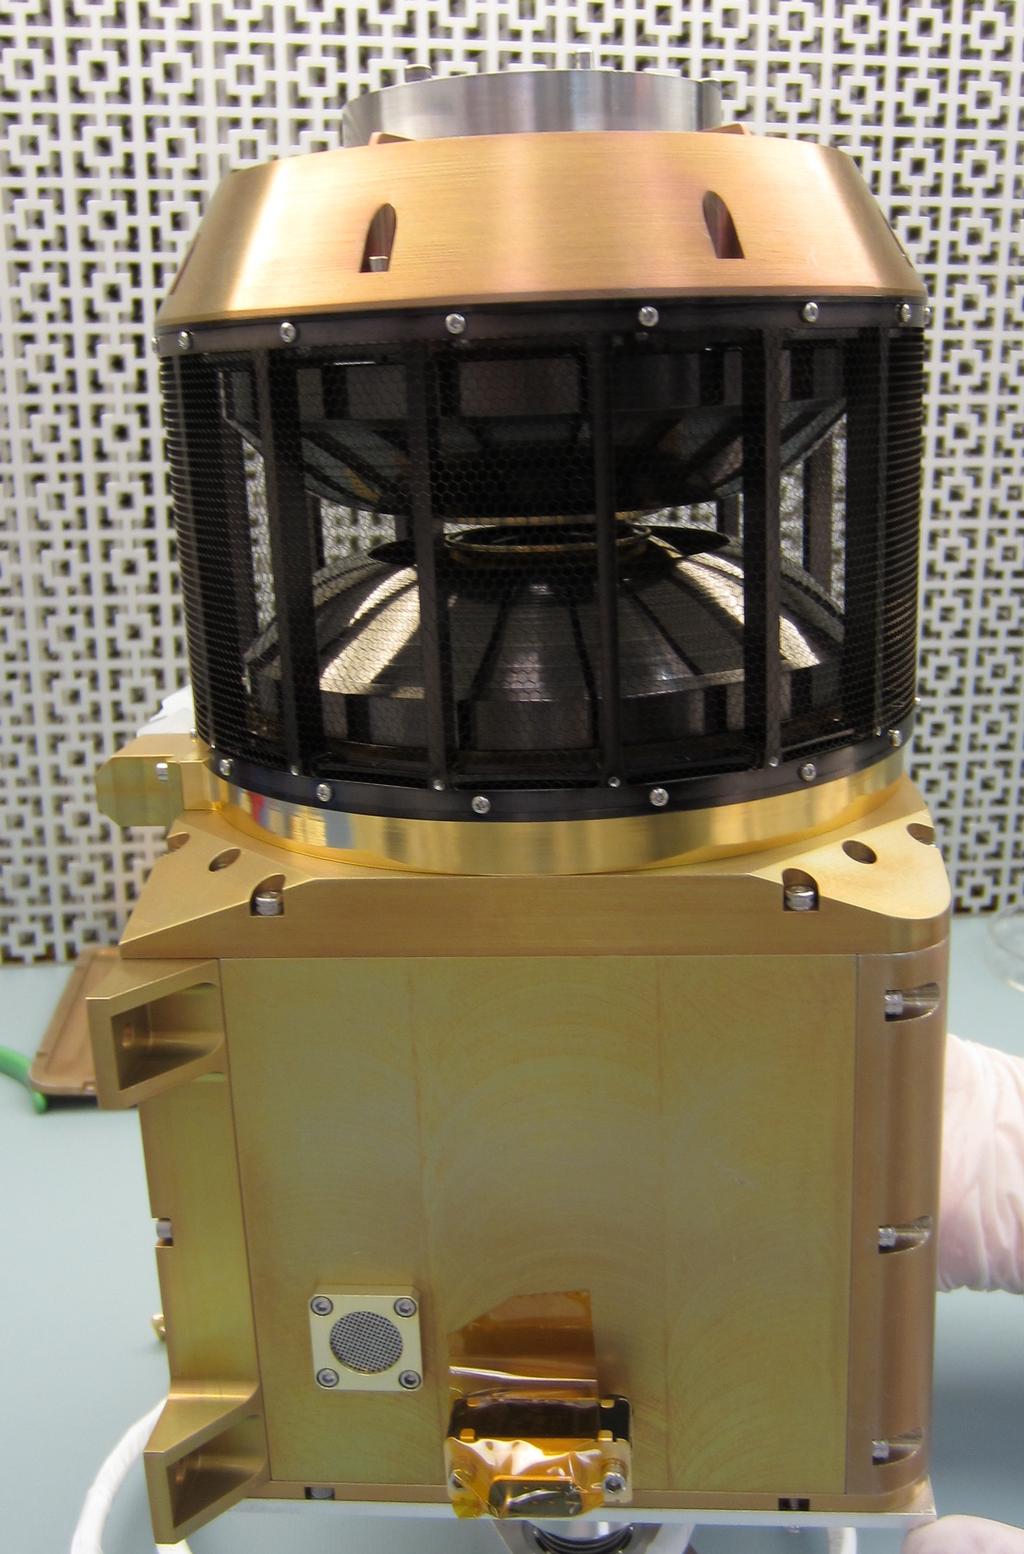 This image shows the wind analyzer instrument box that is yellow metal at the bottom, the top is a circular black cylinder. The whole instrument is the size of a shoebox.